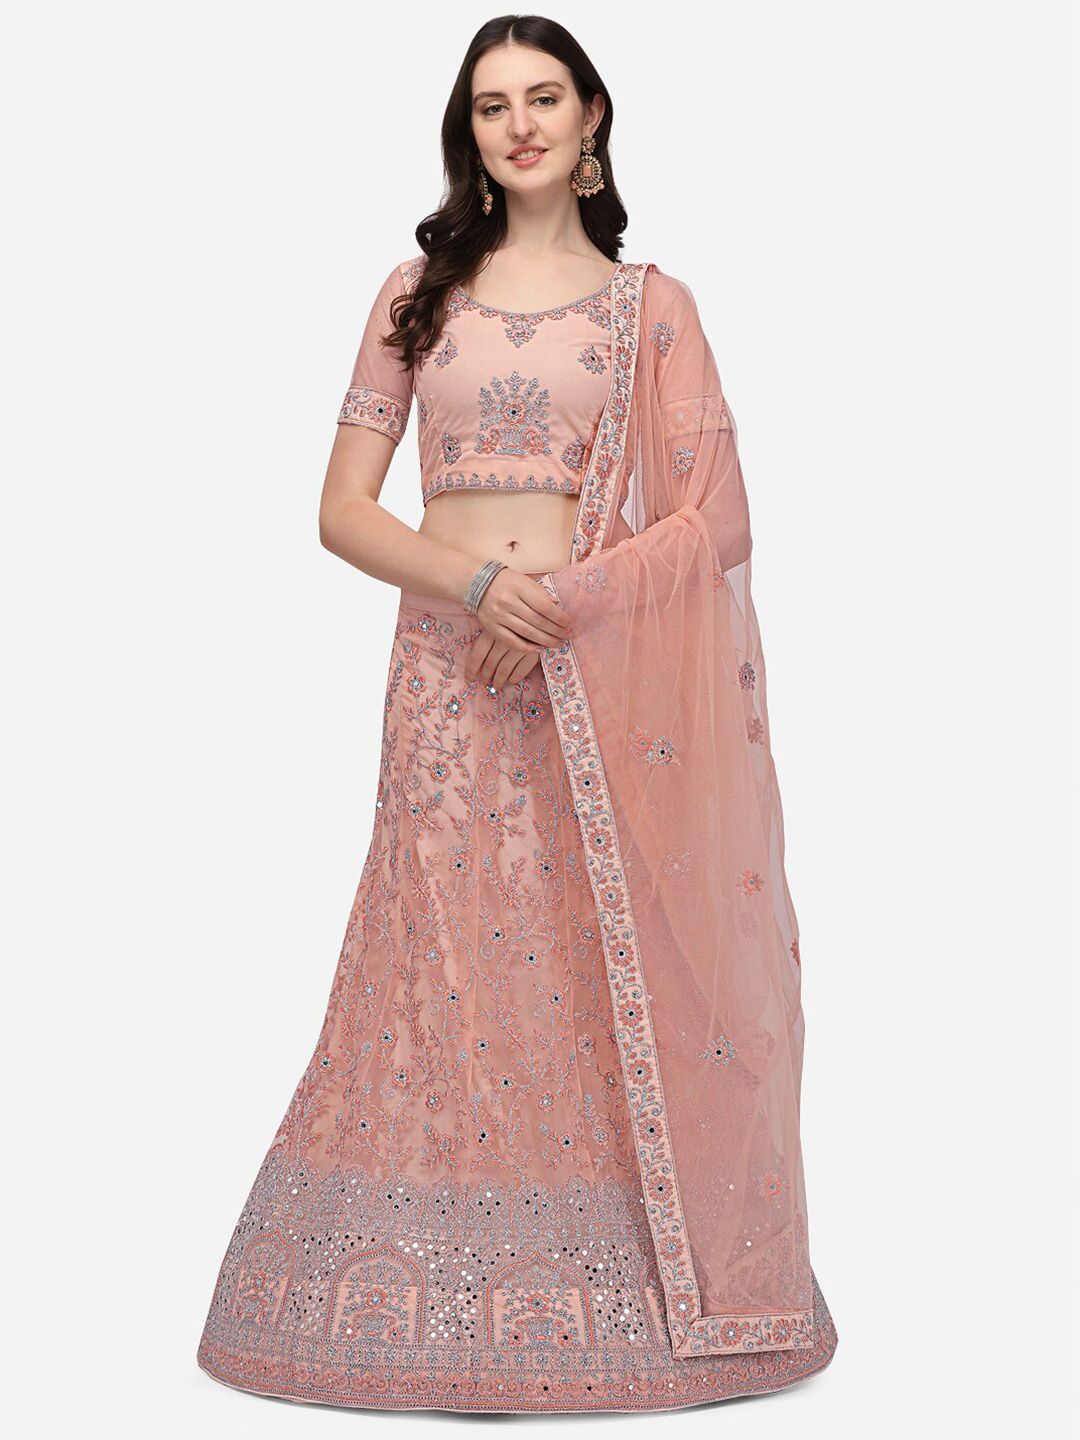 VRSALES Peach-Coloured & Silver-Toned Embroidered Mirror Work Lehnga Choli Set Price in India